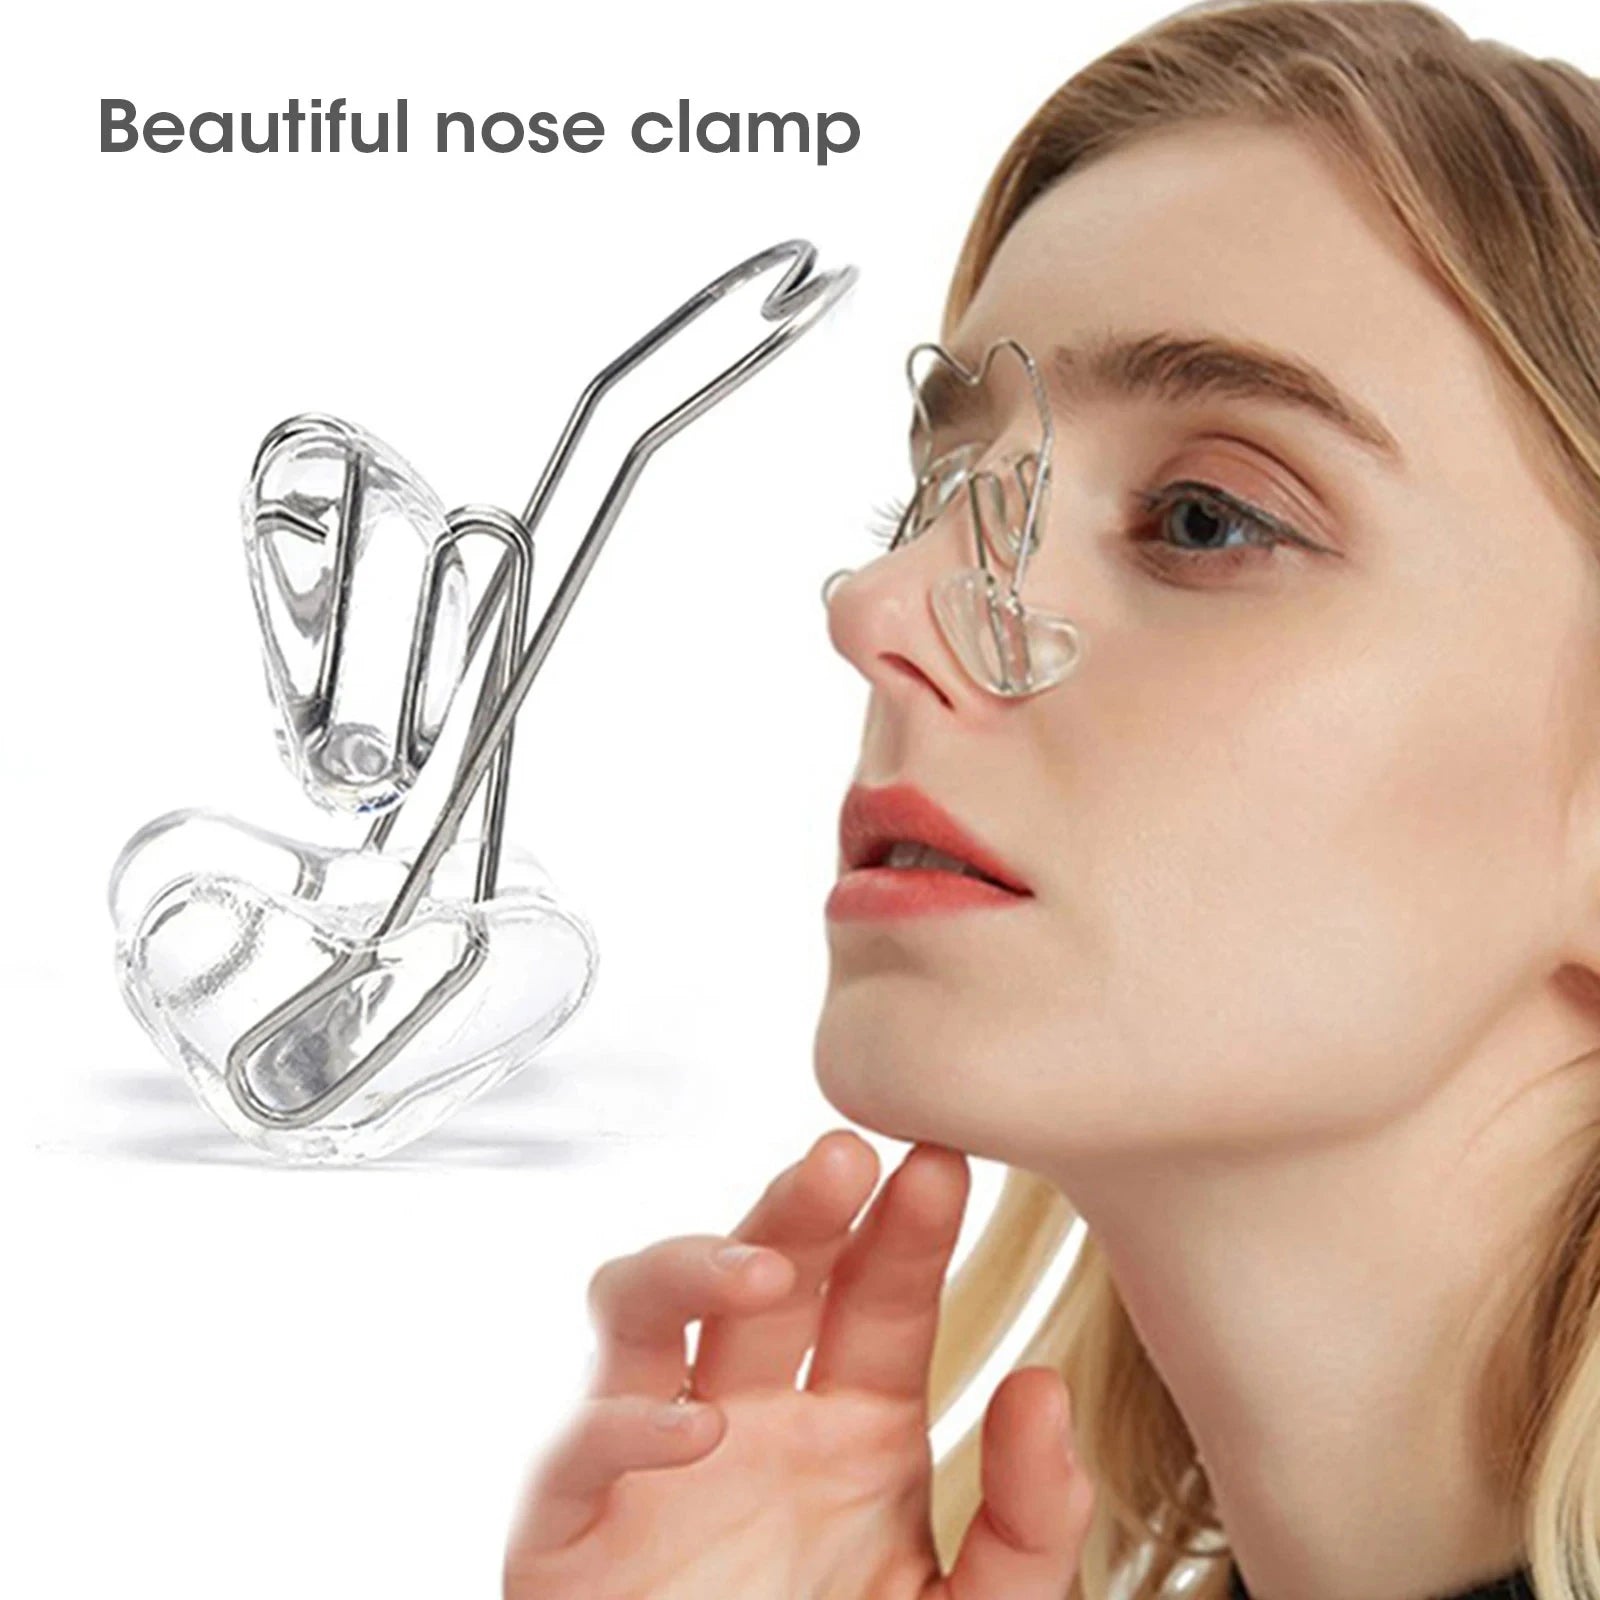       Nose Up Lifting Shaping Shaper Orthotics Clip - Beauty Nose Slimming M – BEAUTY NET